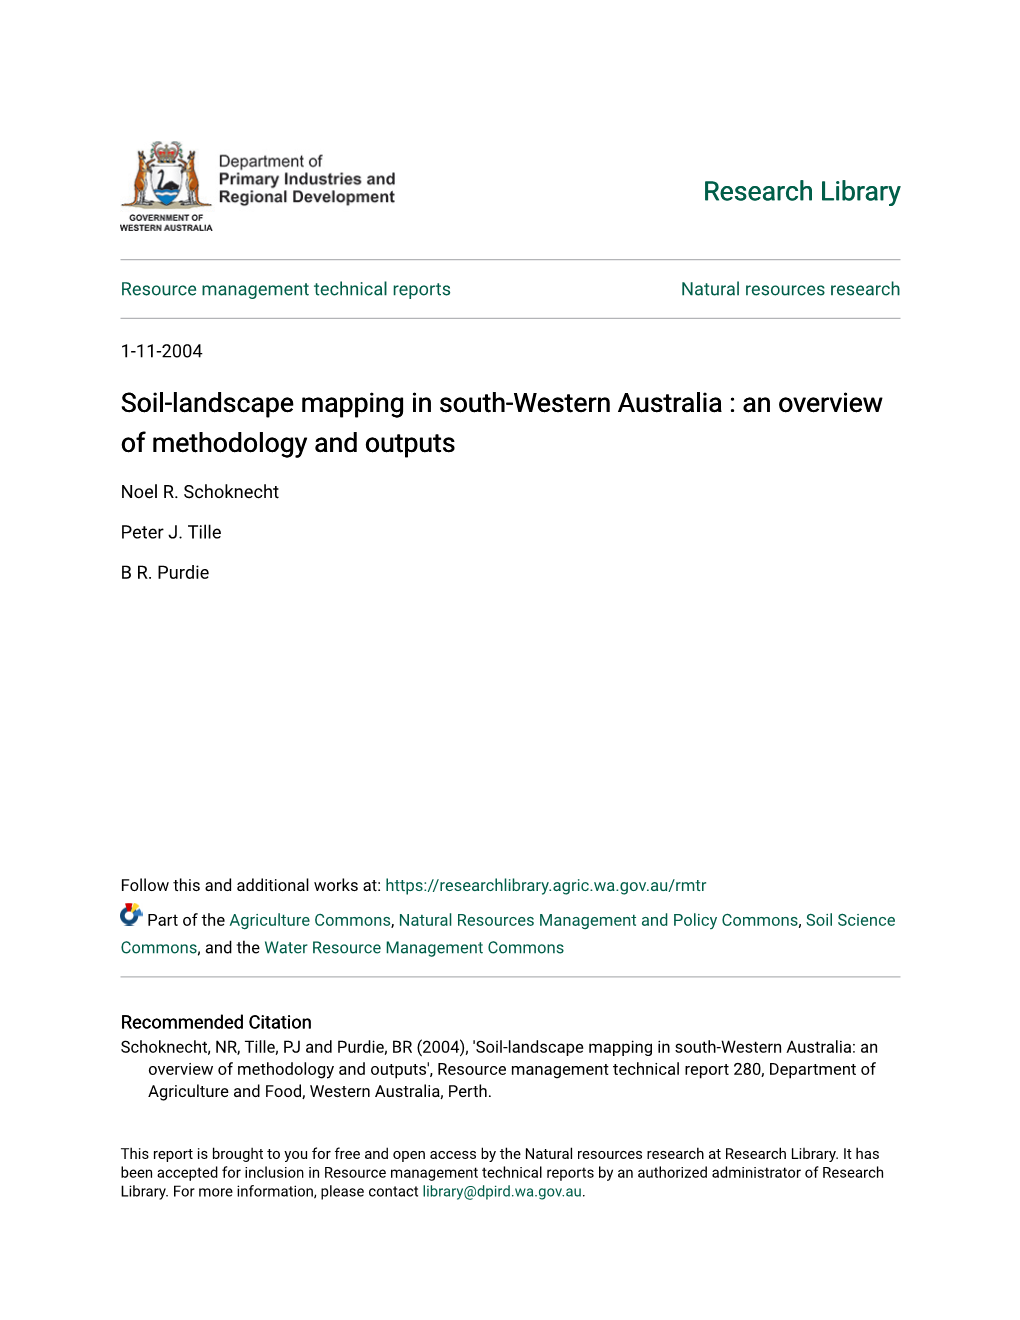 Soil-Landscape Mapping in South-Western Australia : an Overview of Methodology and Outputs